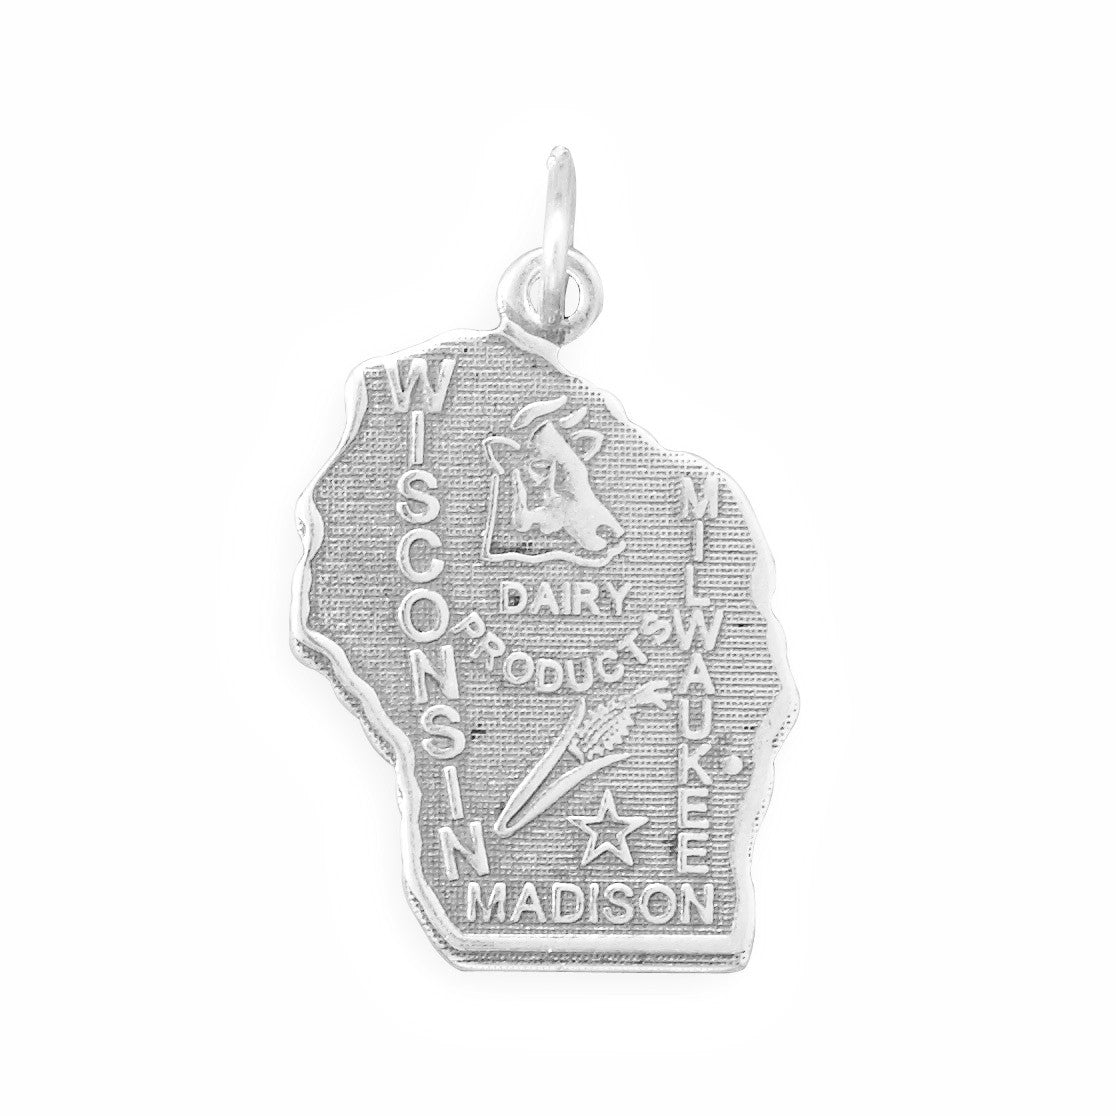 Oxidized Sterling Silver Wisconsin State Charm, Made in USA